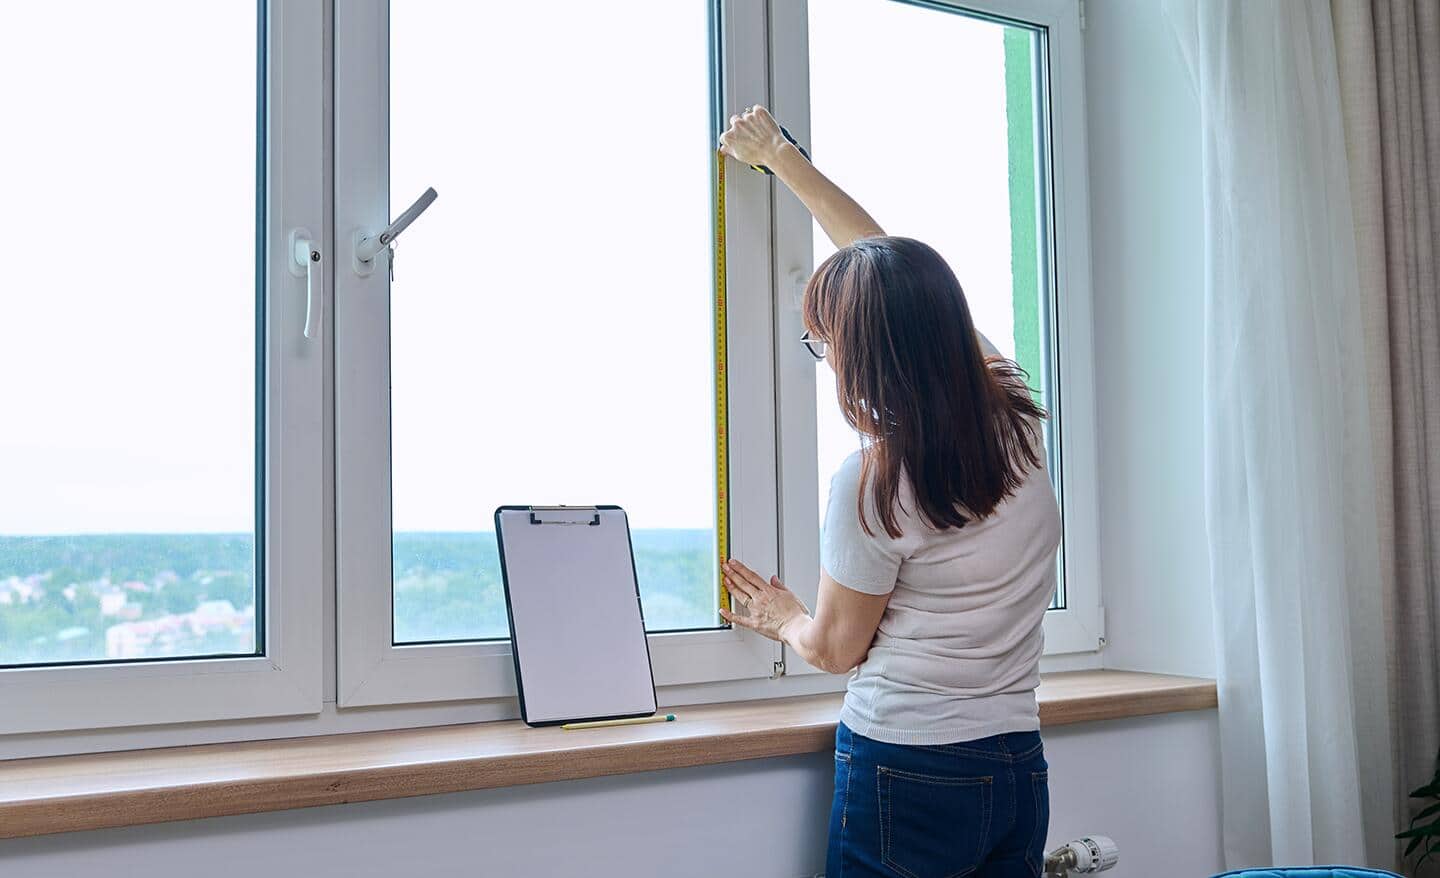 A person measures a window's height using a tape measure.